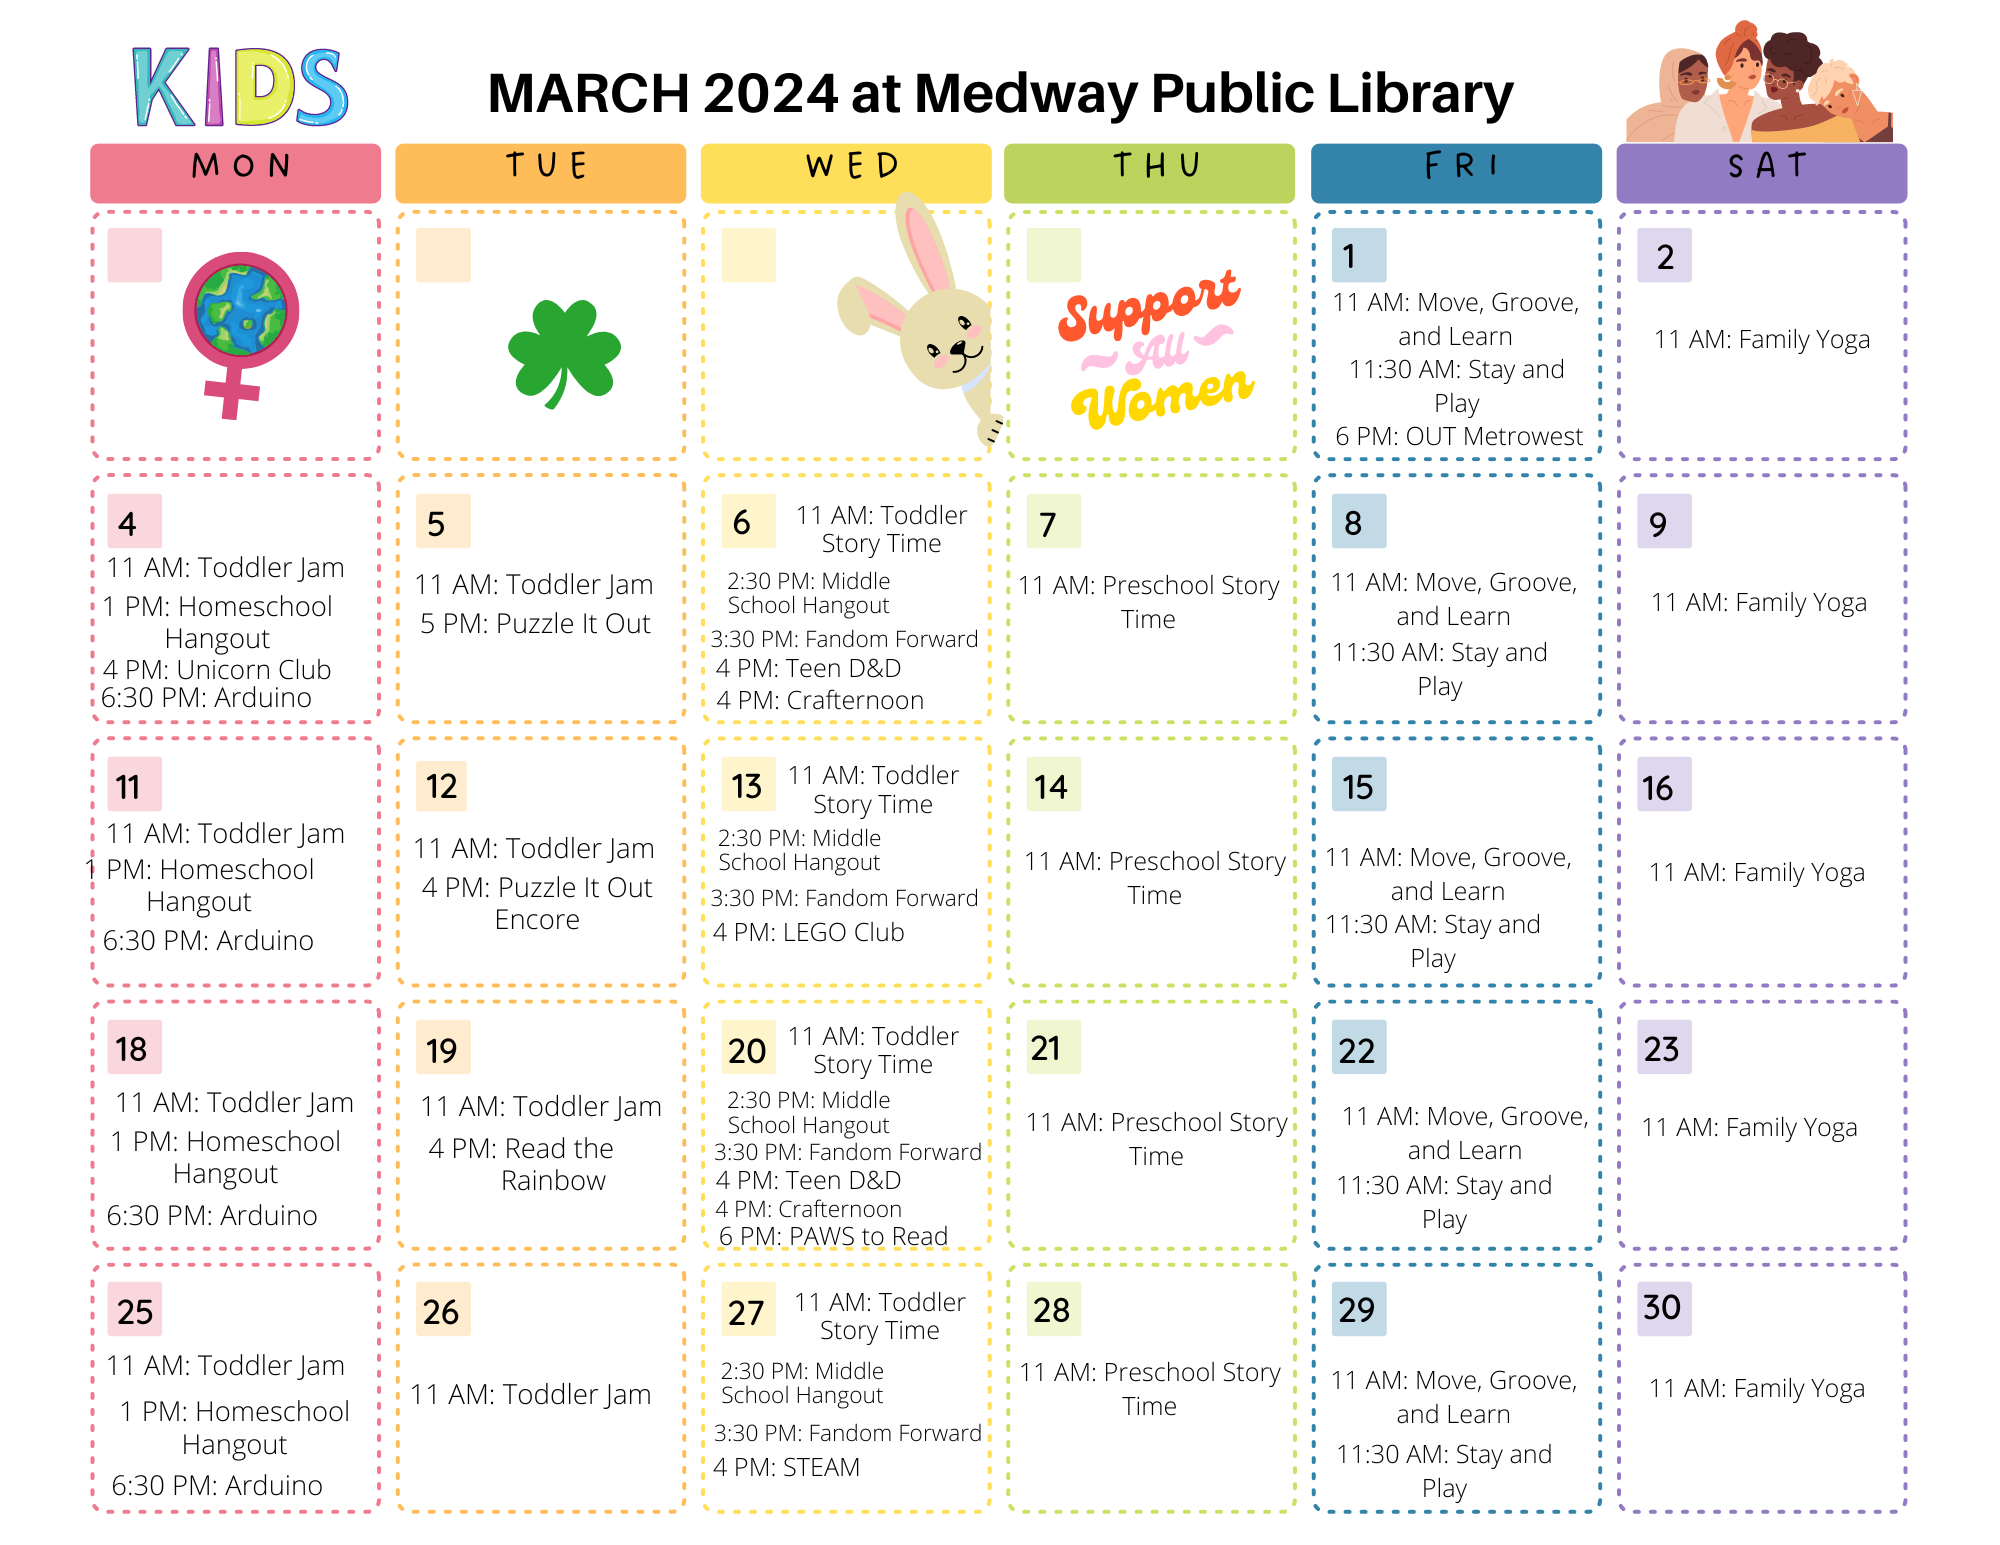 MARCH 2024 KIDS events